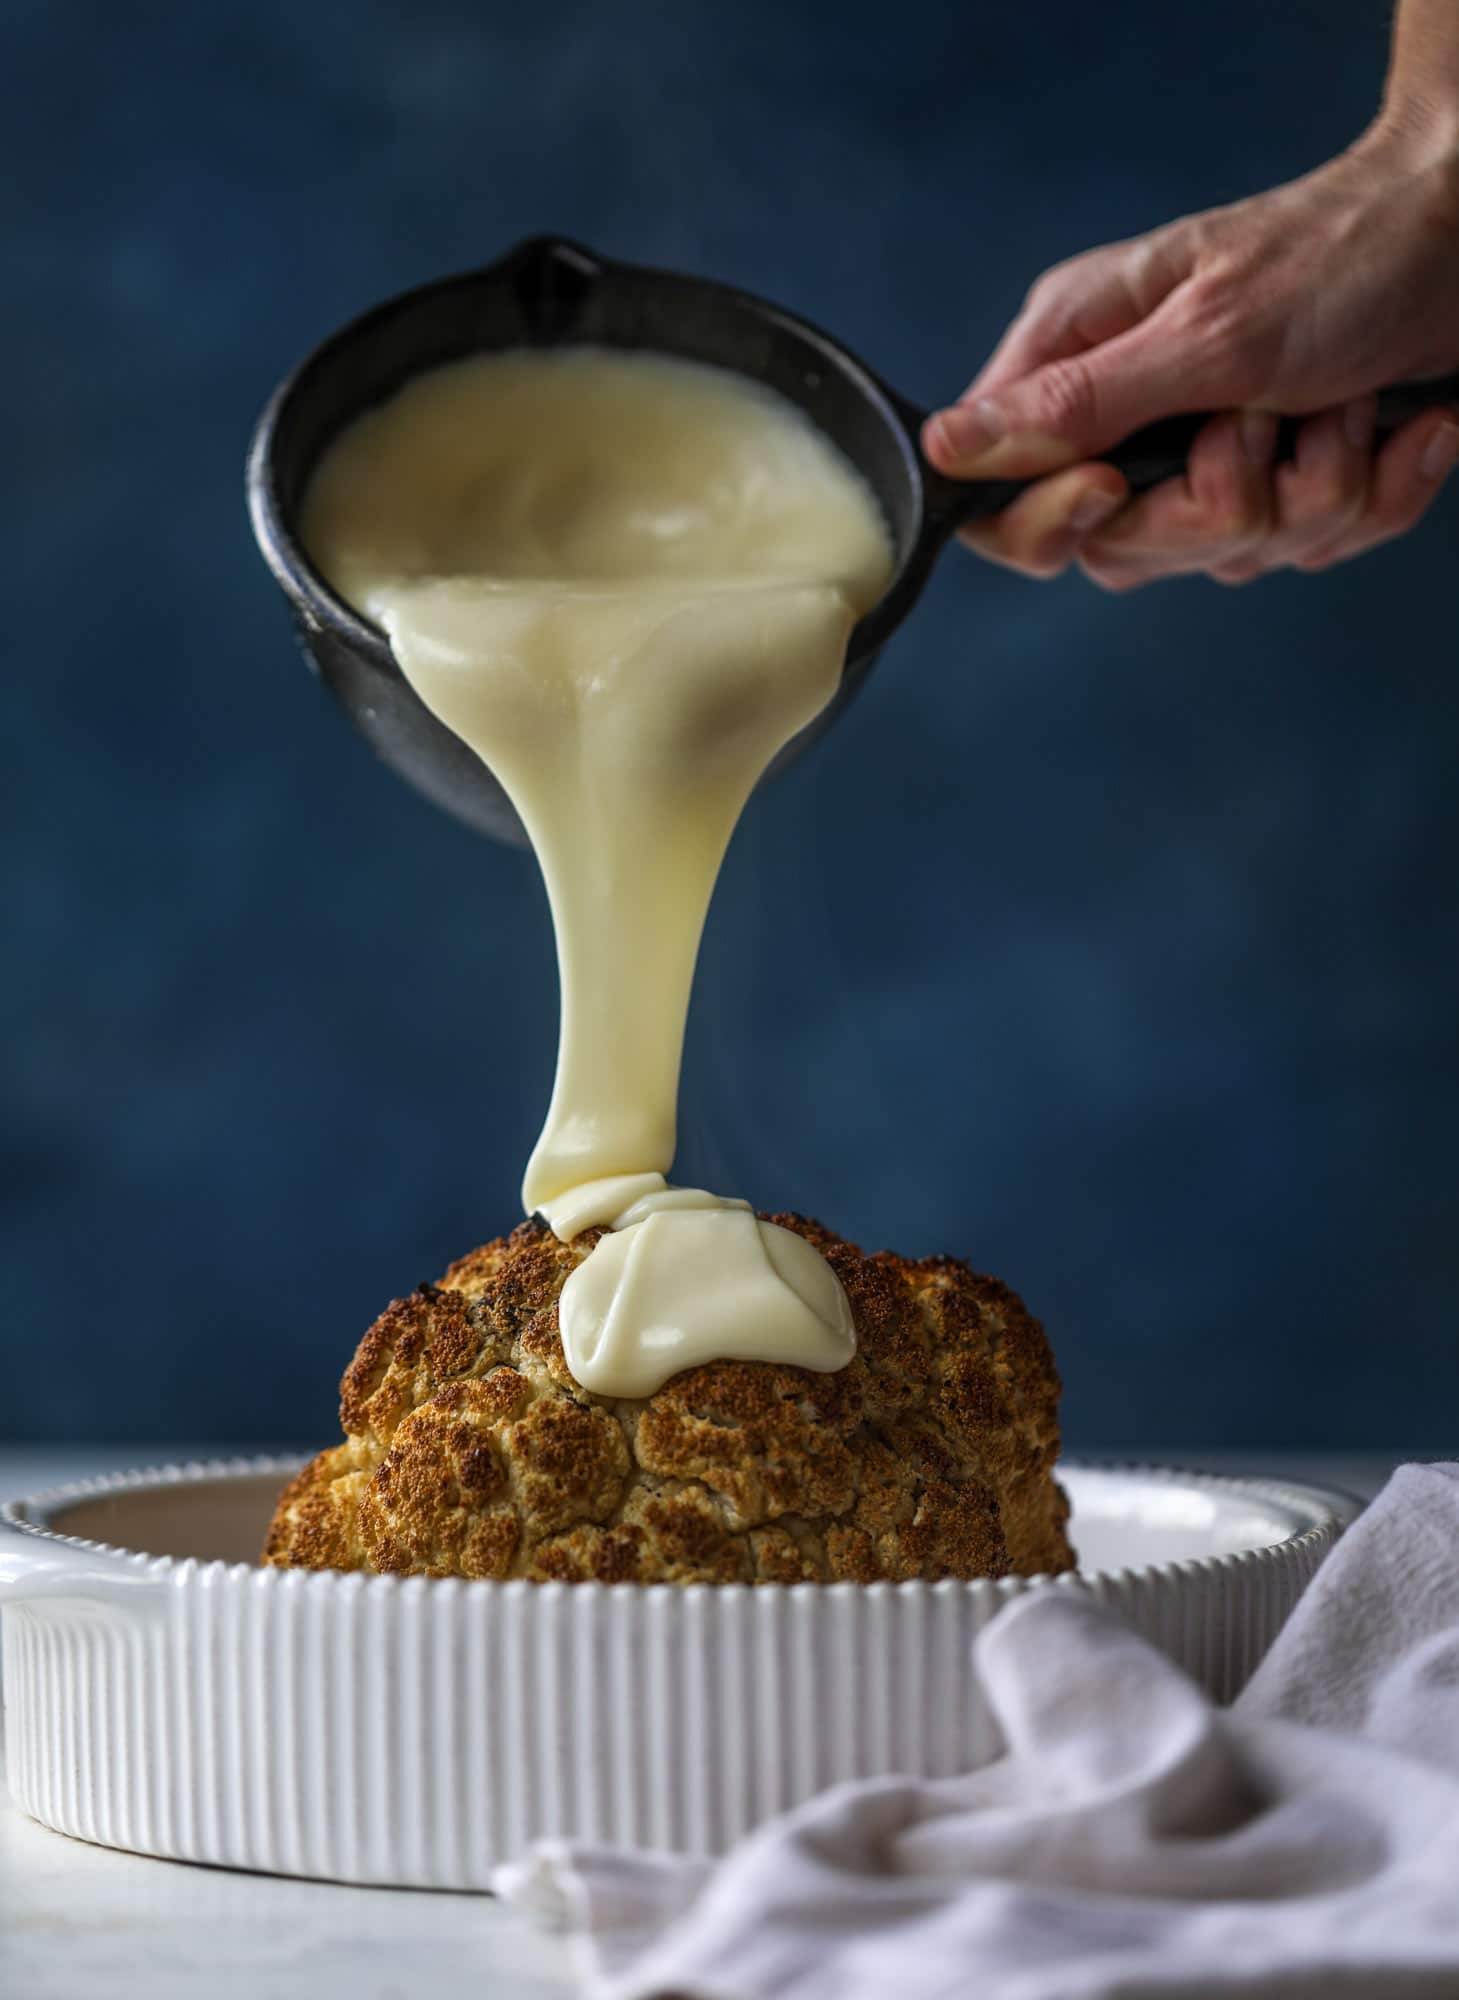 This whole roasted cauliflower fondue is roasted to toasty perfection and then covered in a fondue cheese sauce! Sprinkled with a festive garnish, it's the perfect appetizer or side dish for your dinner party, weeknight meal or movie night! I howsweeteats.com #wholeroasted #cauliflower